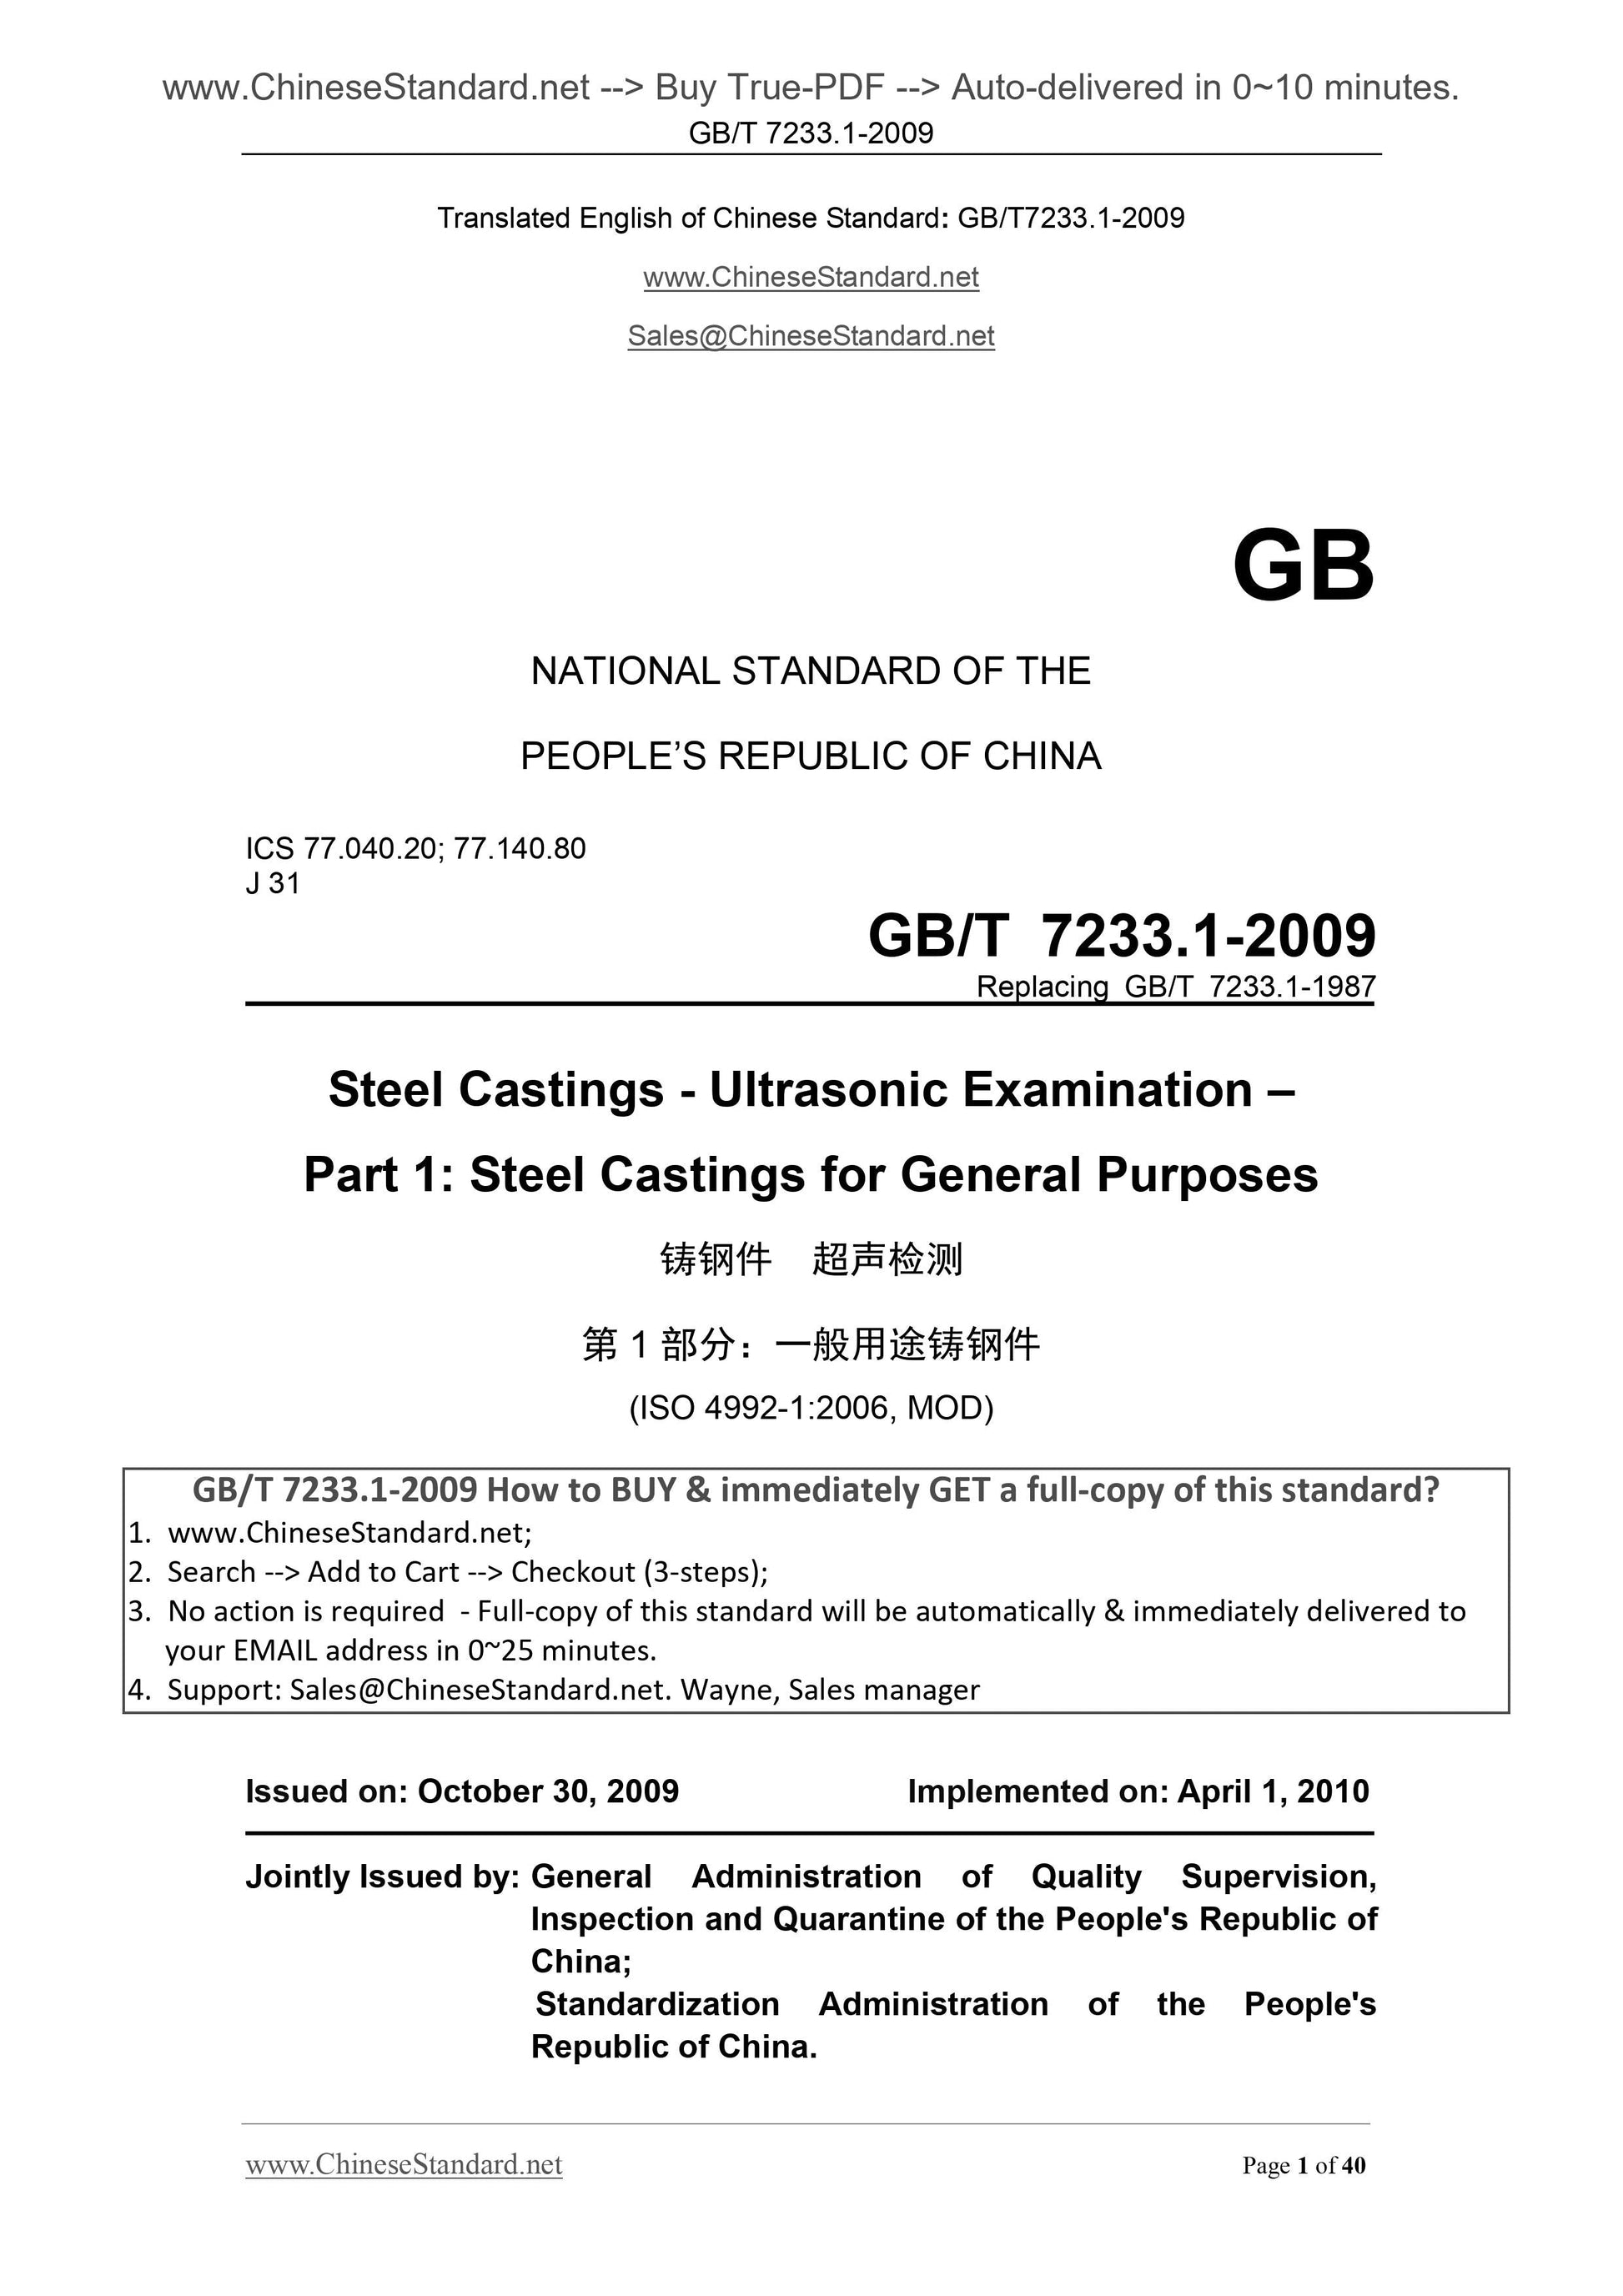 GB/T 7233.1-2009 Page 1